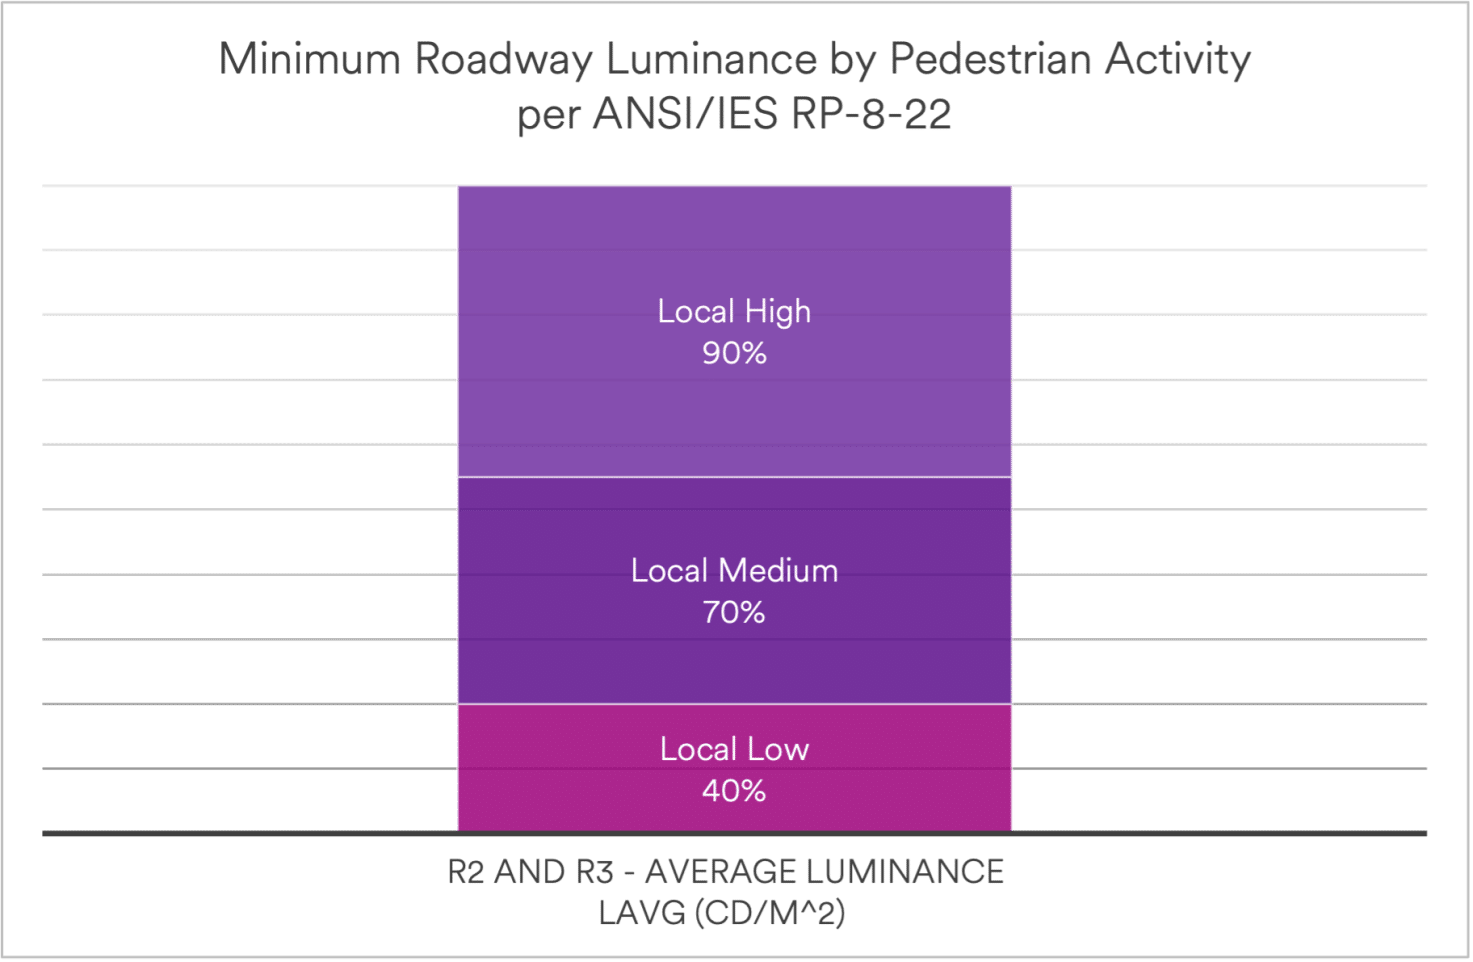 A chart showing the minimum roadway luminance levels for Local roadway classifications and R2/R3 roadway surfaces.